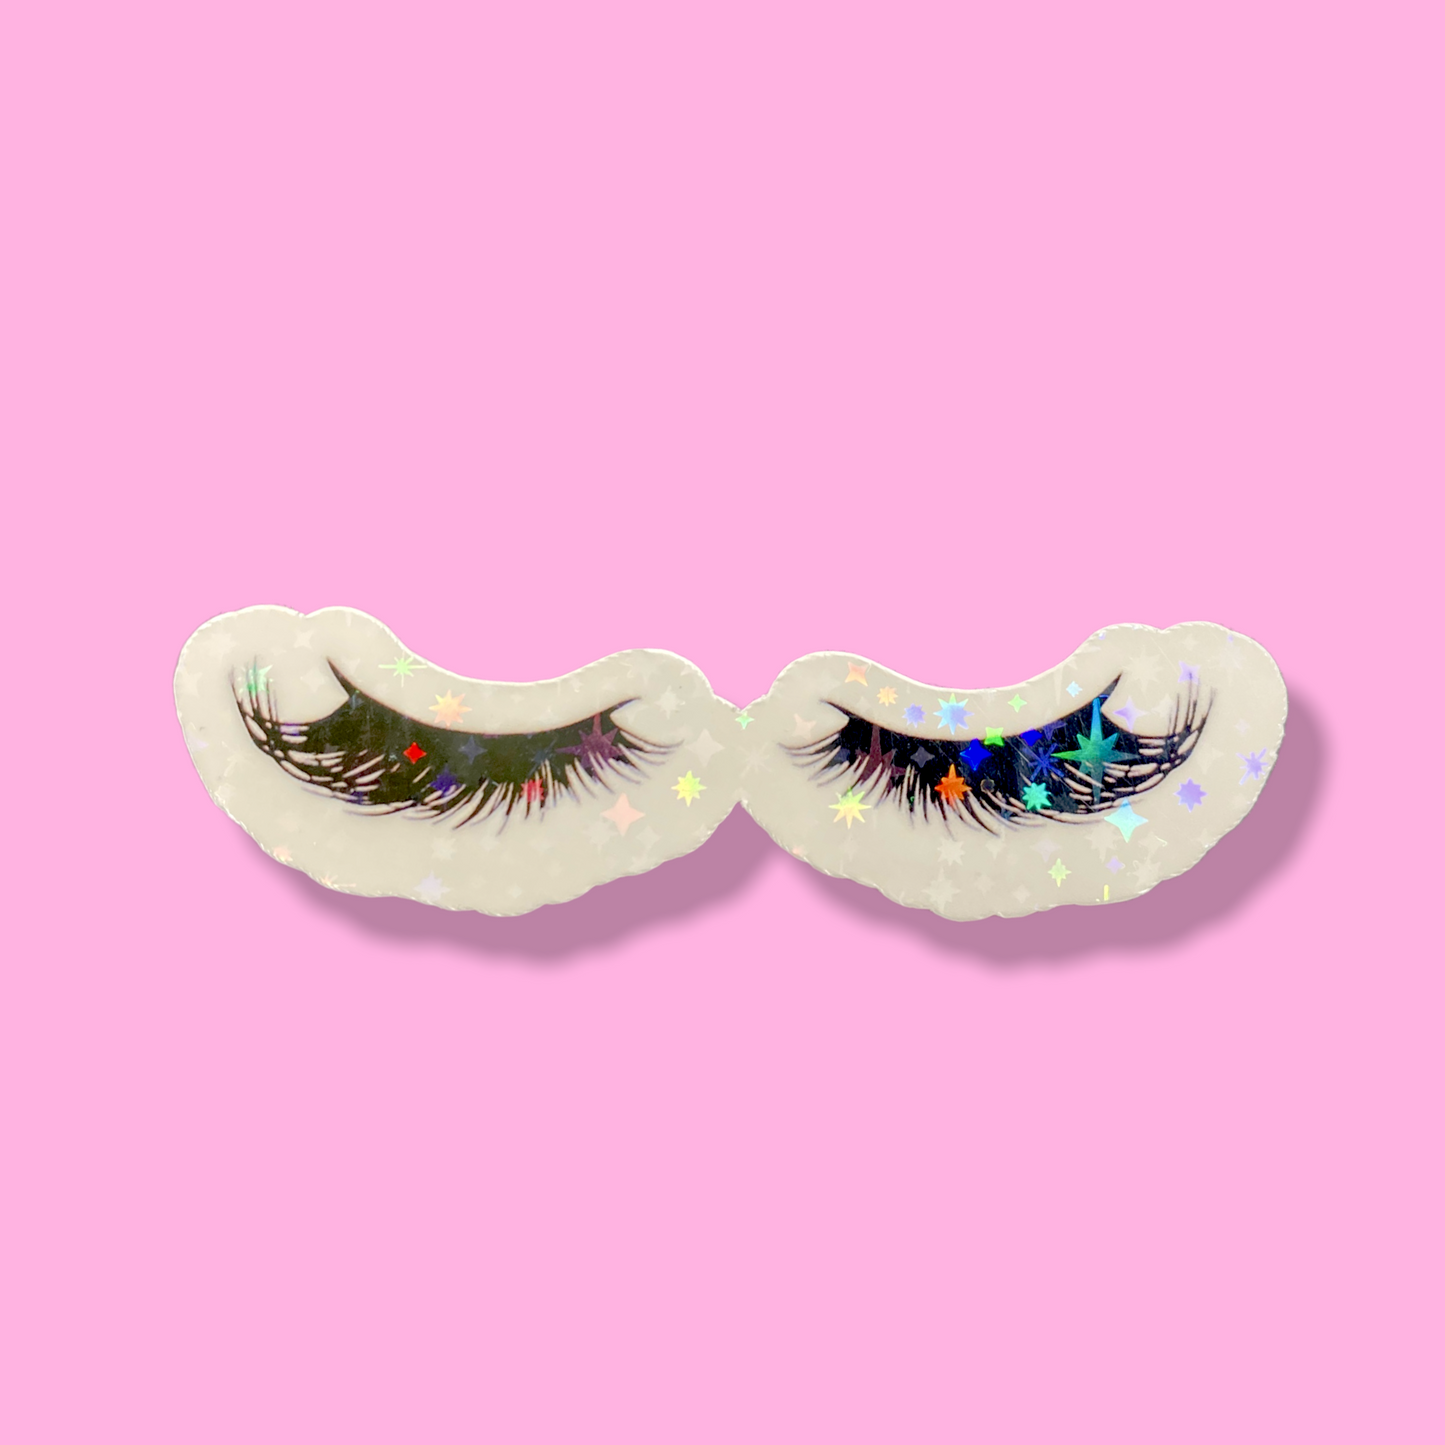 STICKER - FLUFFY LASHES | 2.5x 0.5" | WATERPROOF | HOLOGRAPHIC | PRICE FOR 1 STICKER